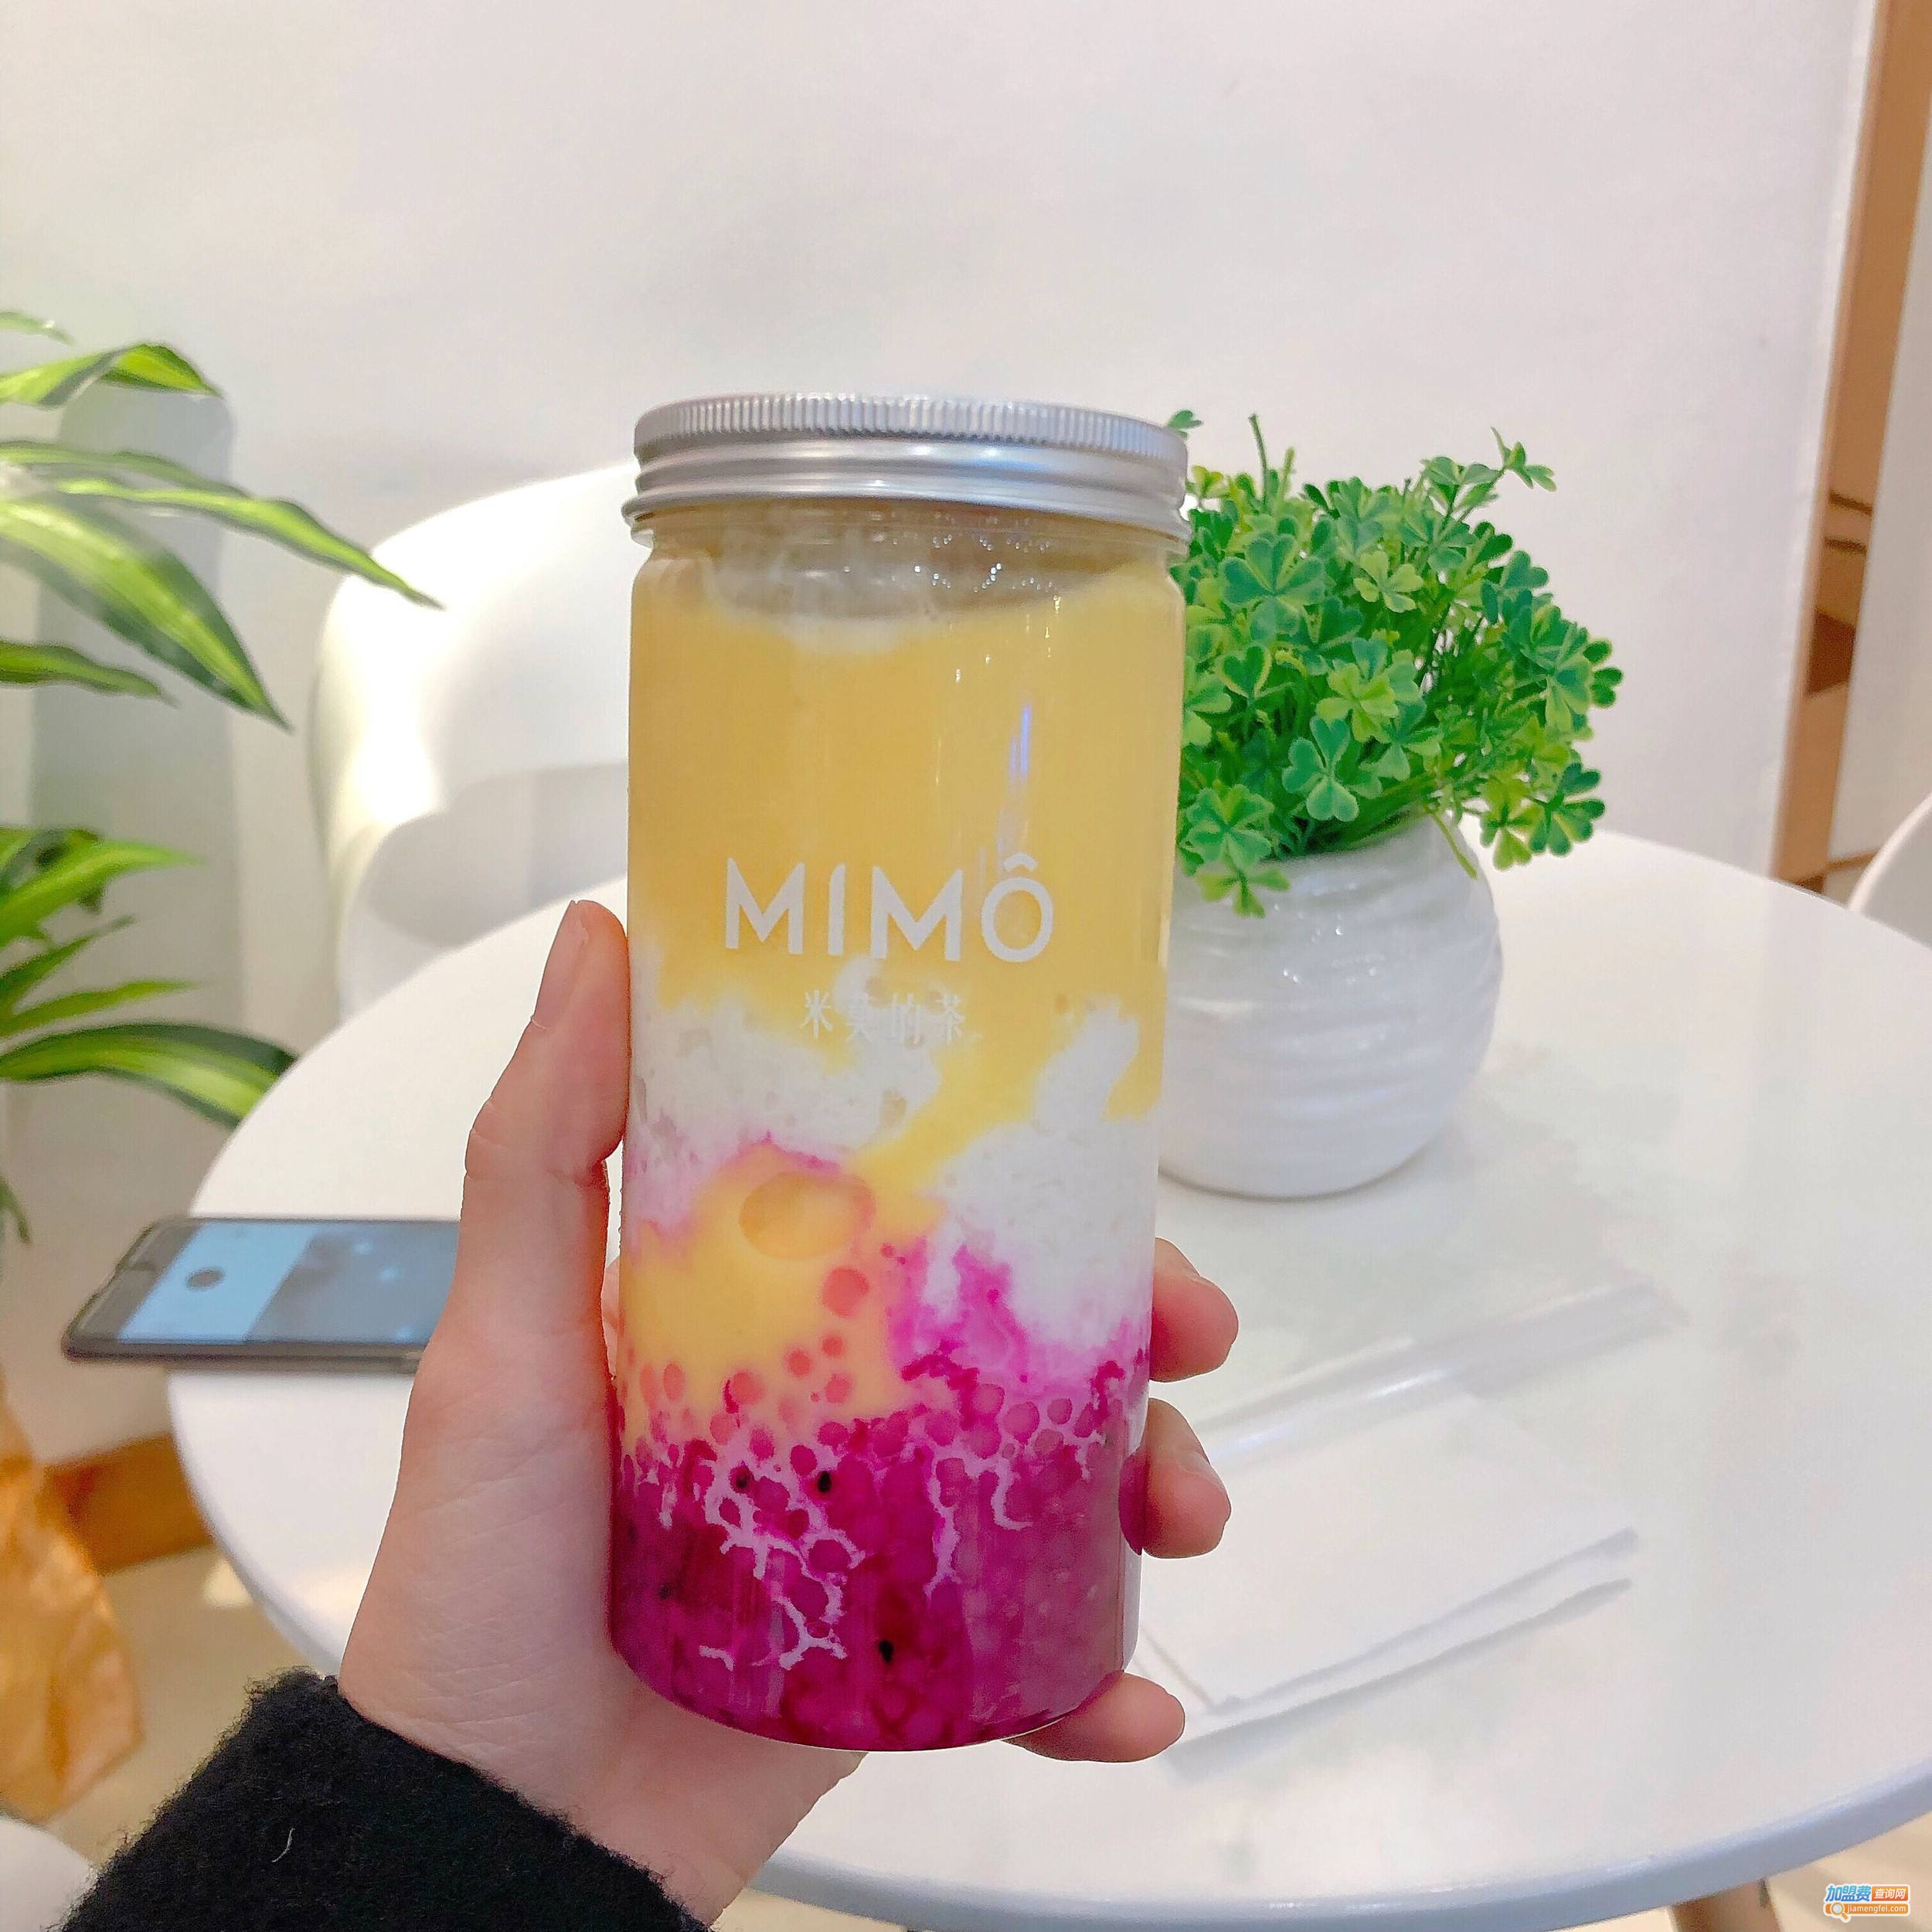 mimo的茶